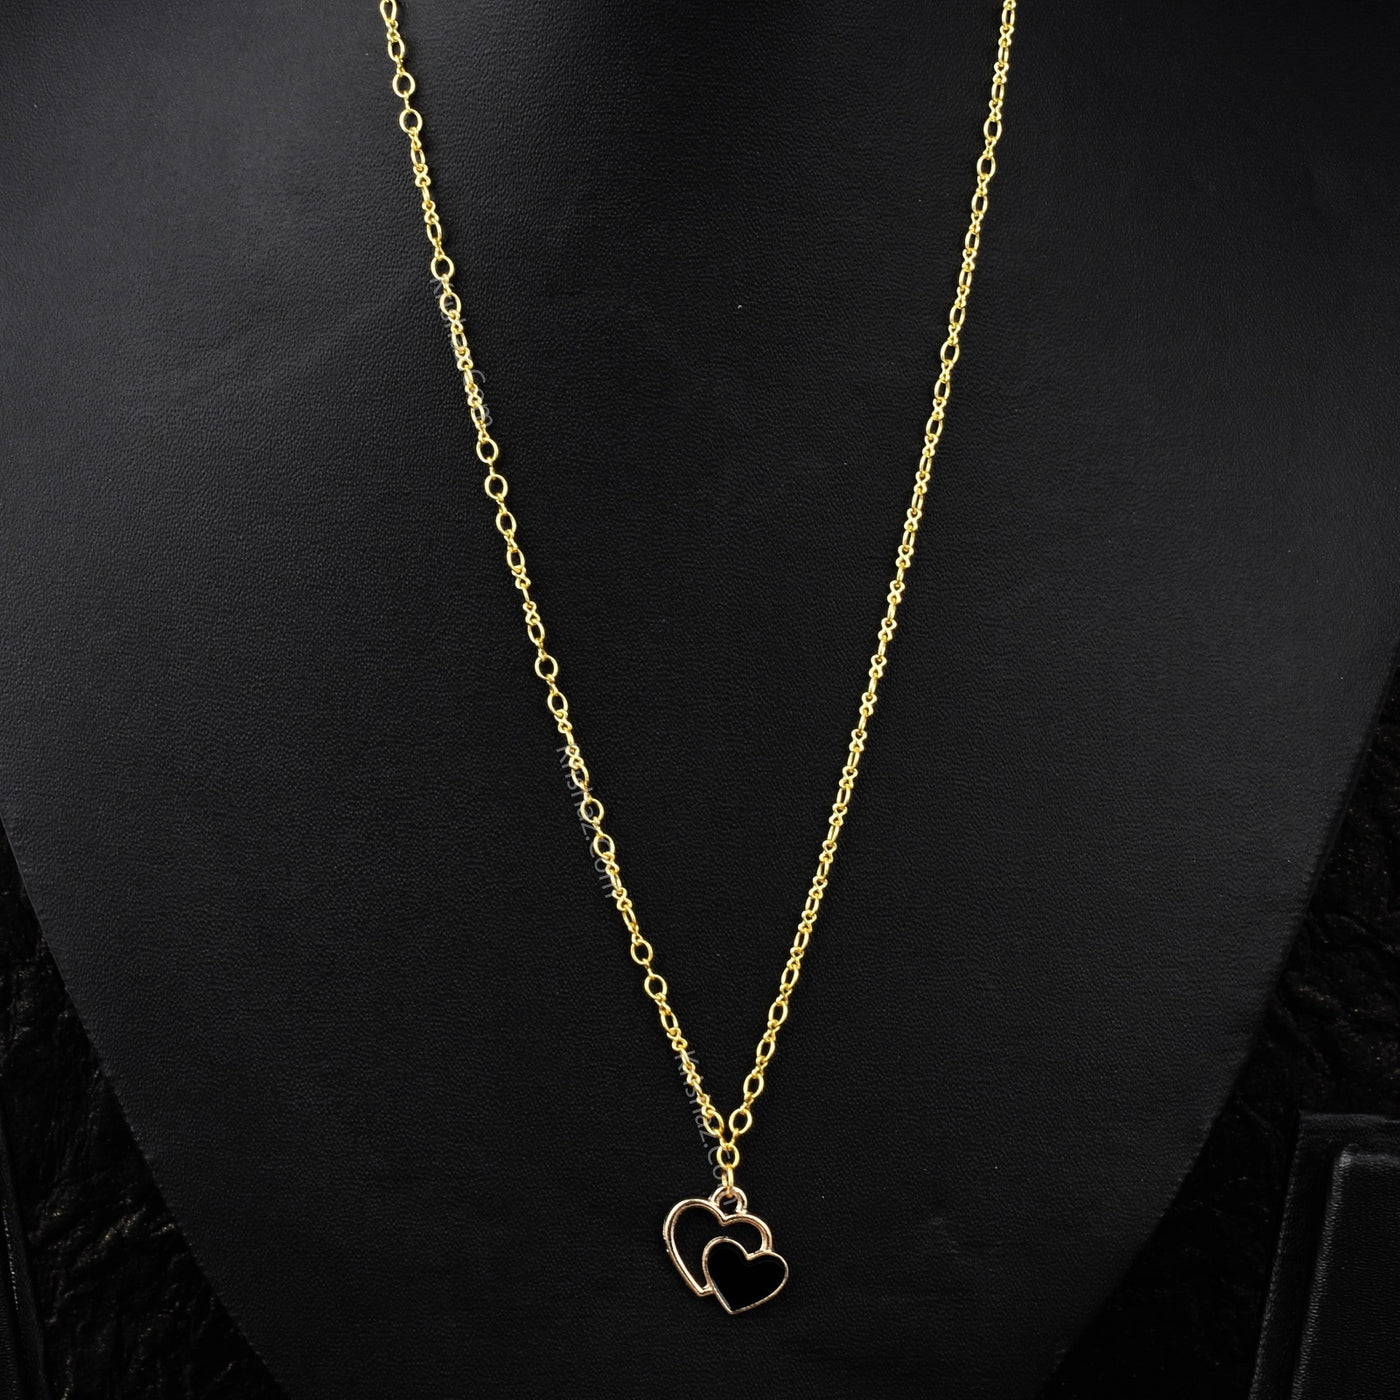 Gold Figure 8 Dainty Chains with Black Heart charms